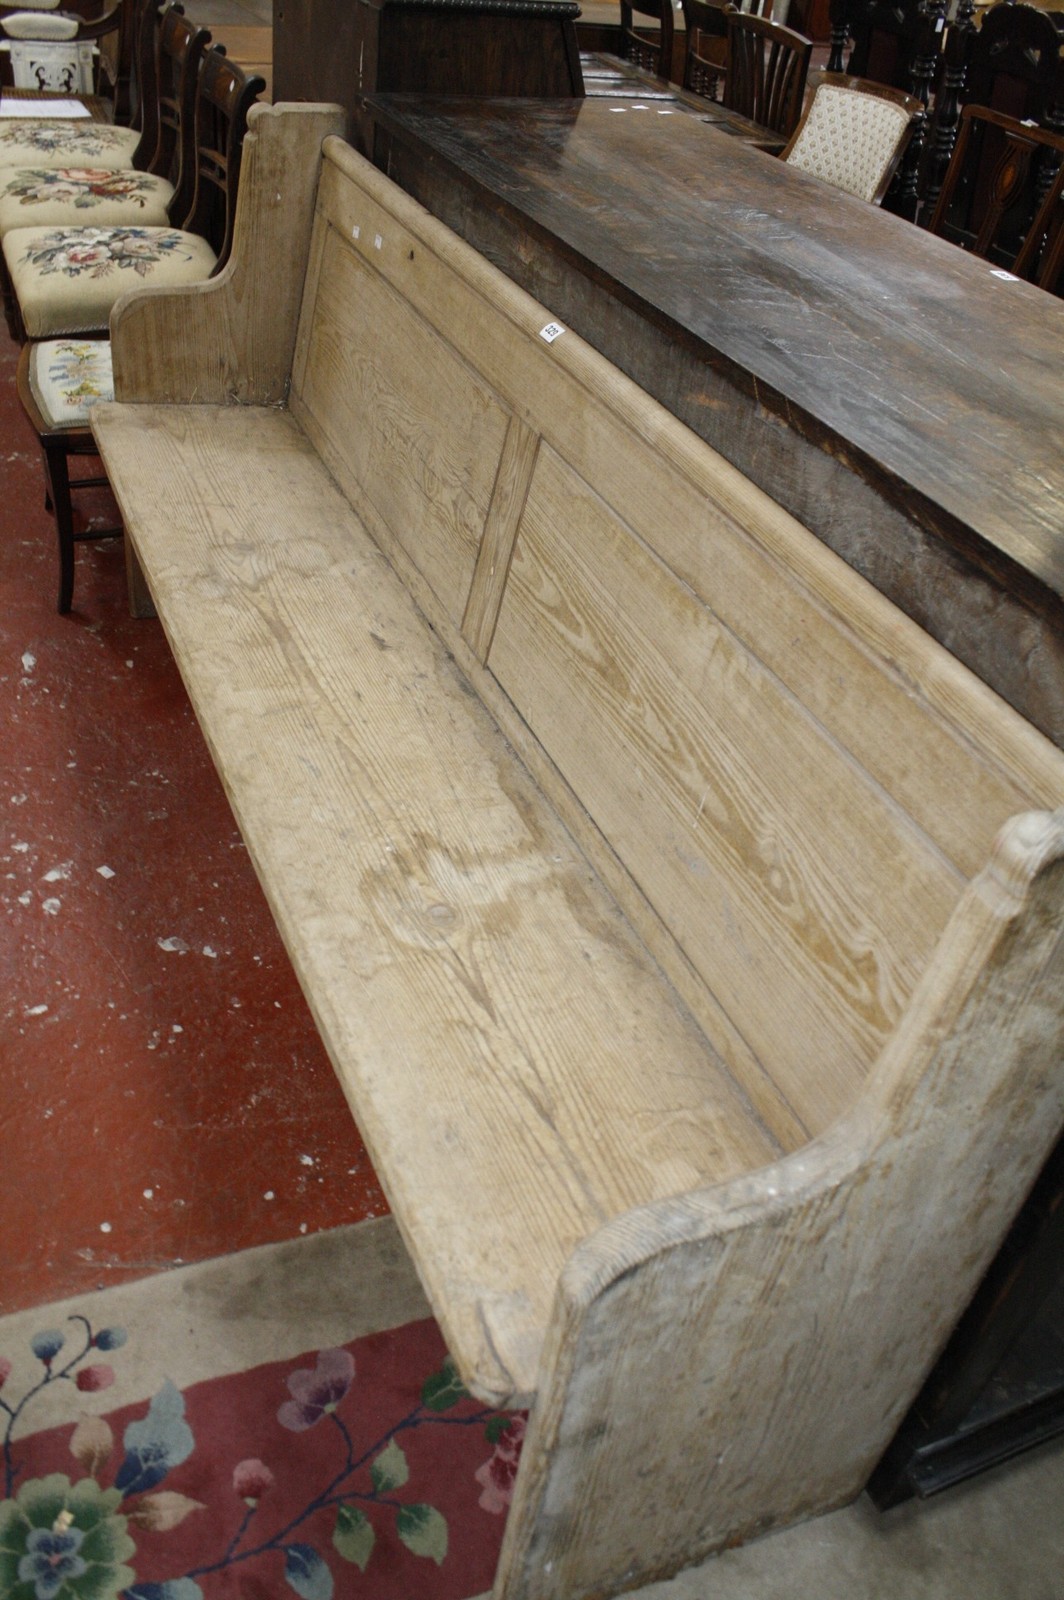 A pine pew/hall bench. 190cm long.